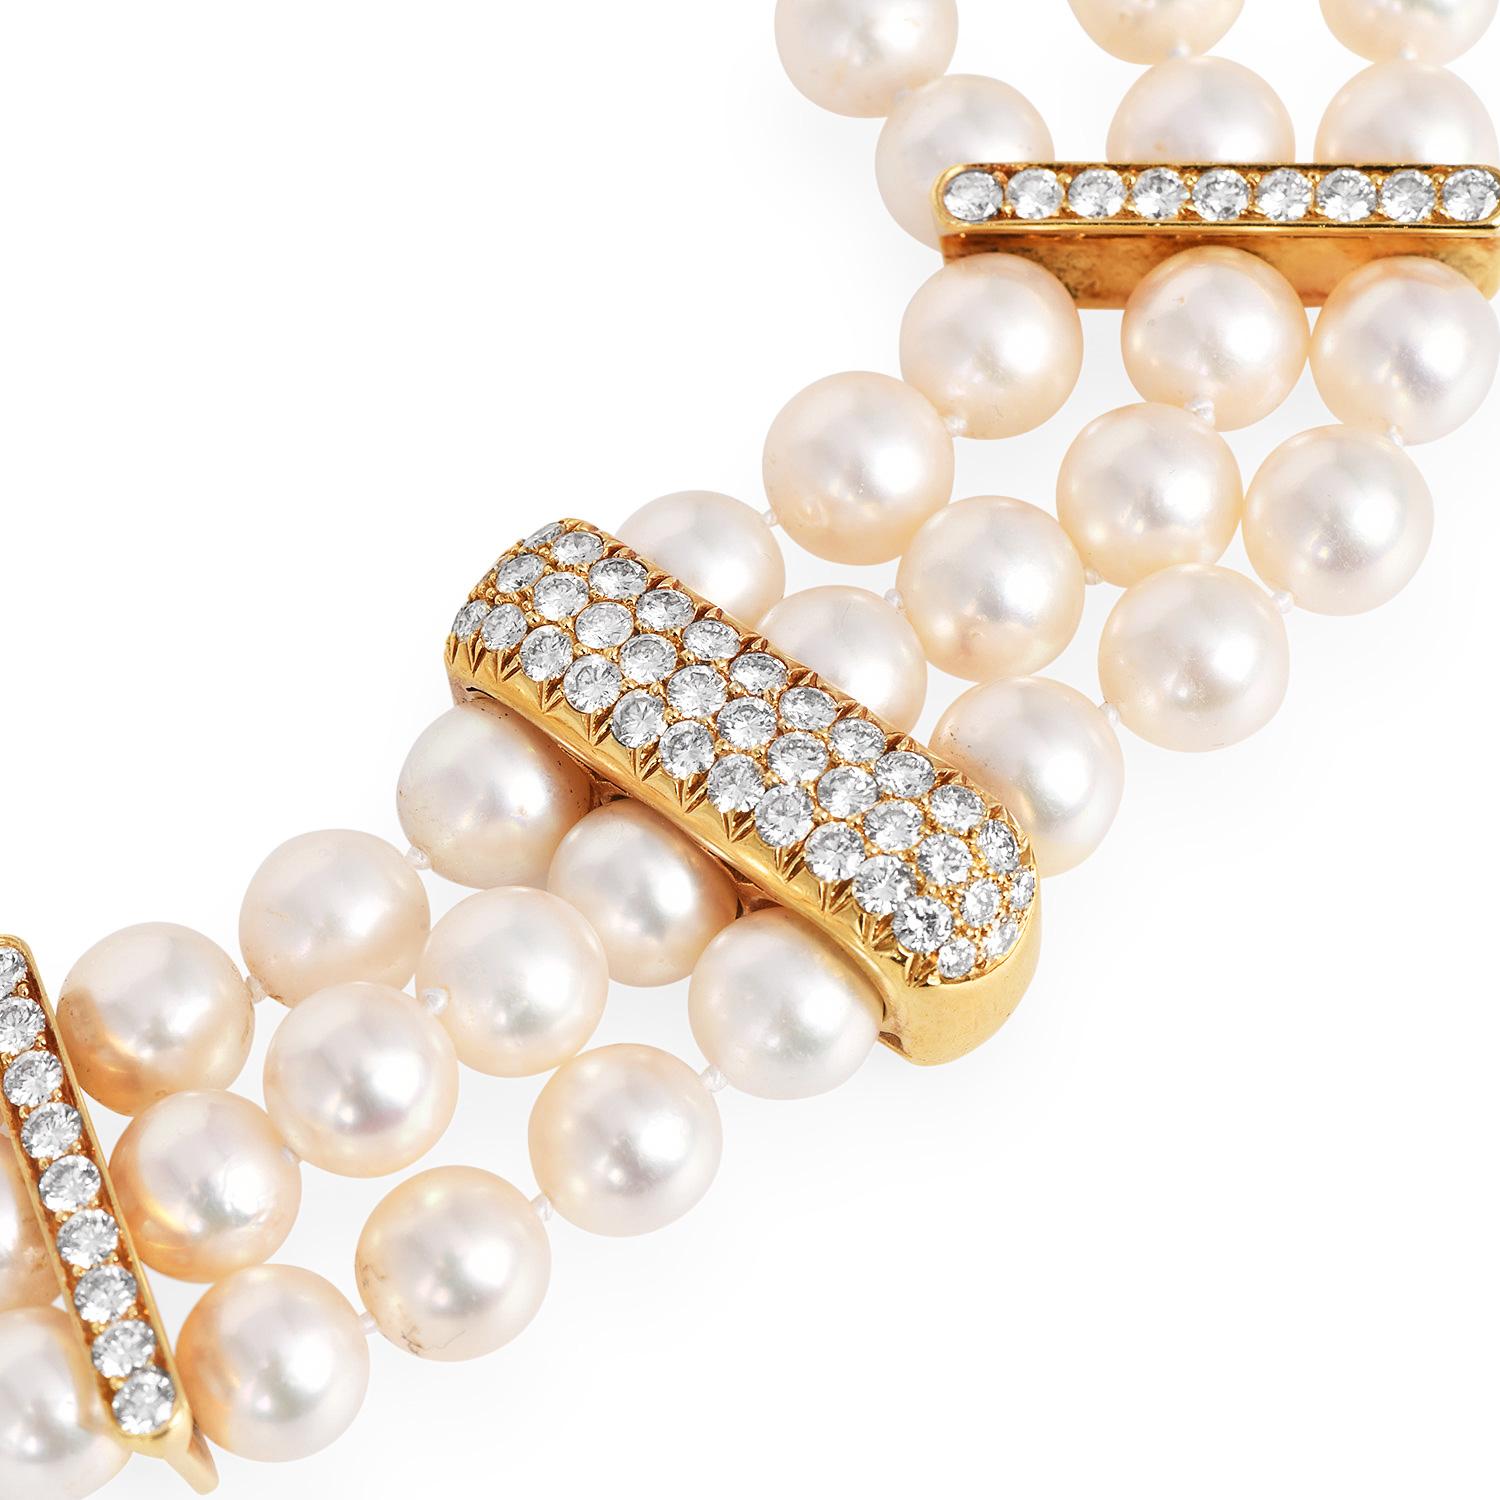 Elegant Estate 1980s Natural Diamond and three Strand Akoya pearl Choker Necklace with solid 18K Yellow Gold Diamond Bar Link 

The necklace has an Insert closure

Natural Diamonds

Number of Diamonds: 178

Diamond Carat Weight approx: